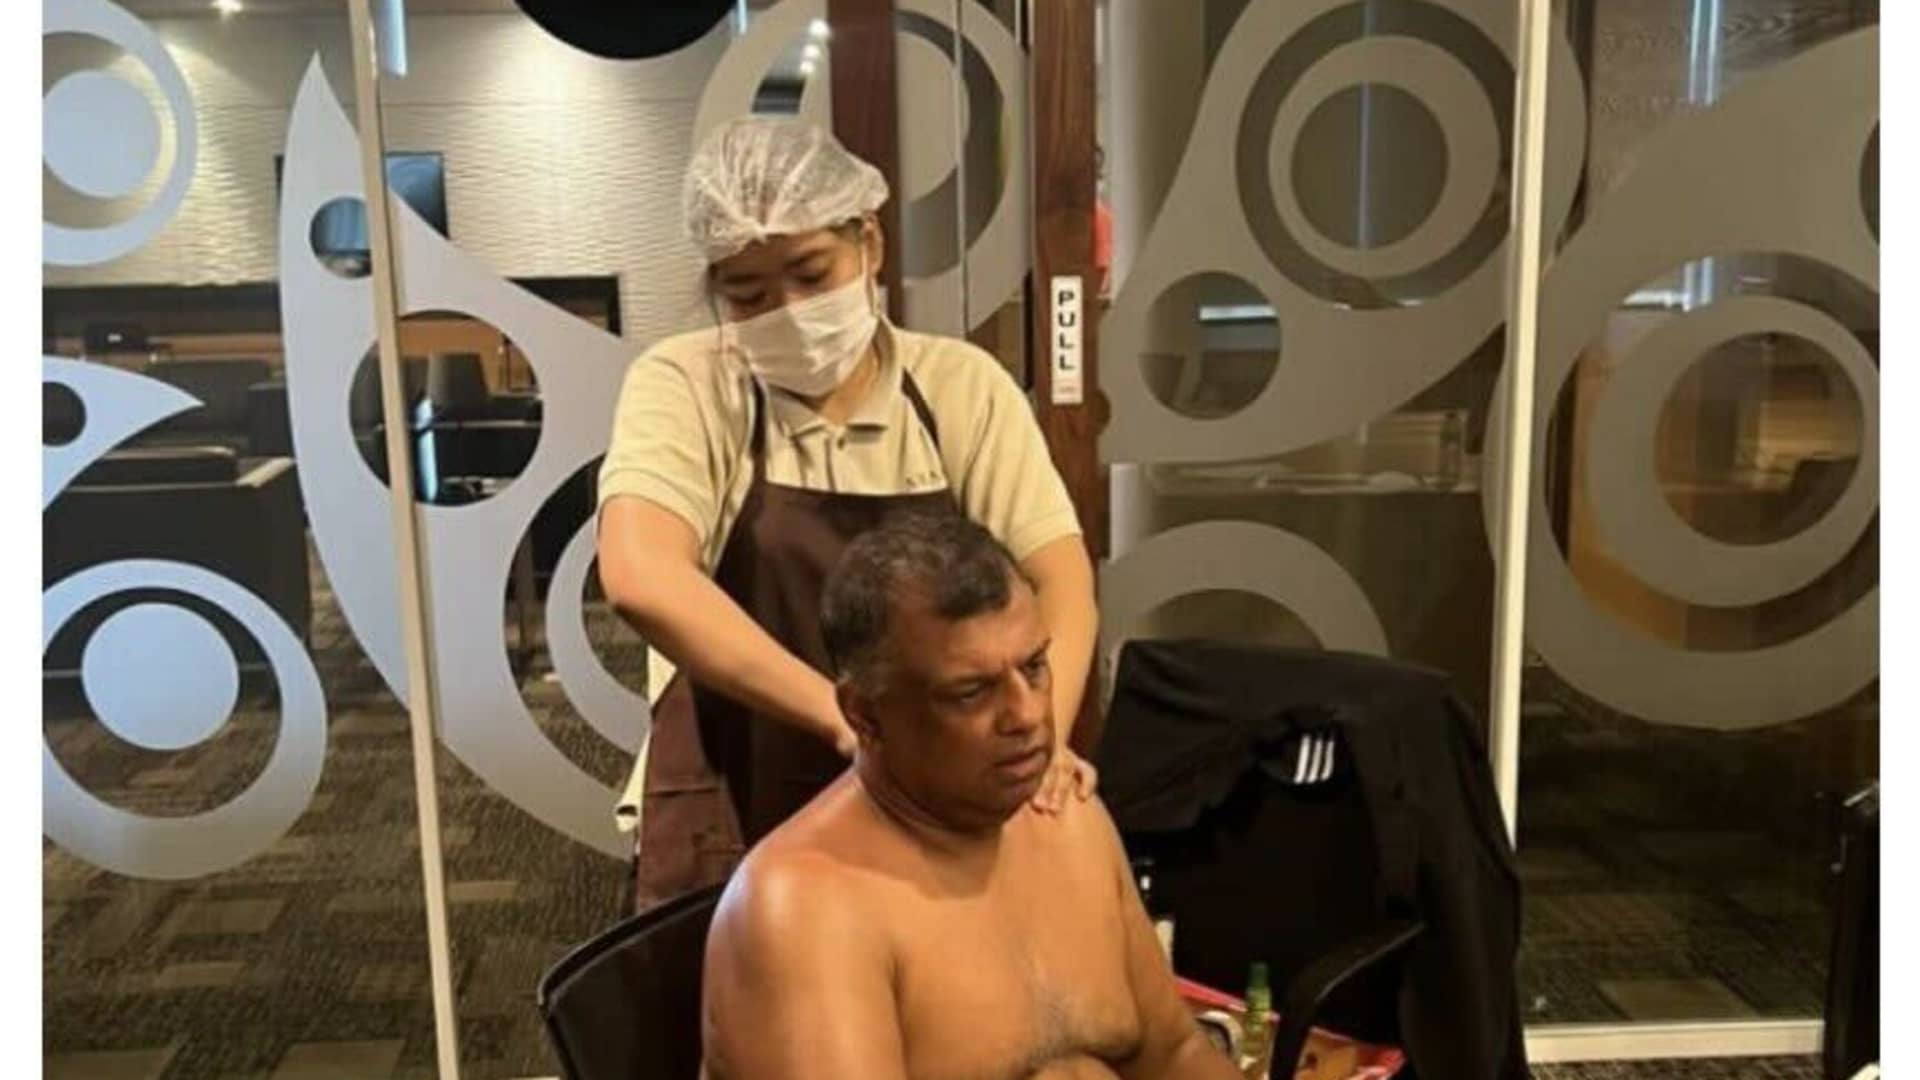 AirAsia CEO Tony Fernandes criticized for LinkedIn post showing topless massage during meeting